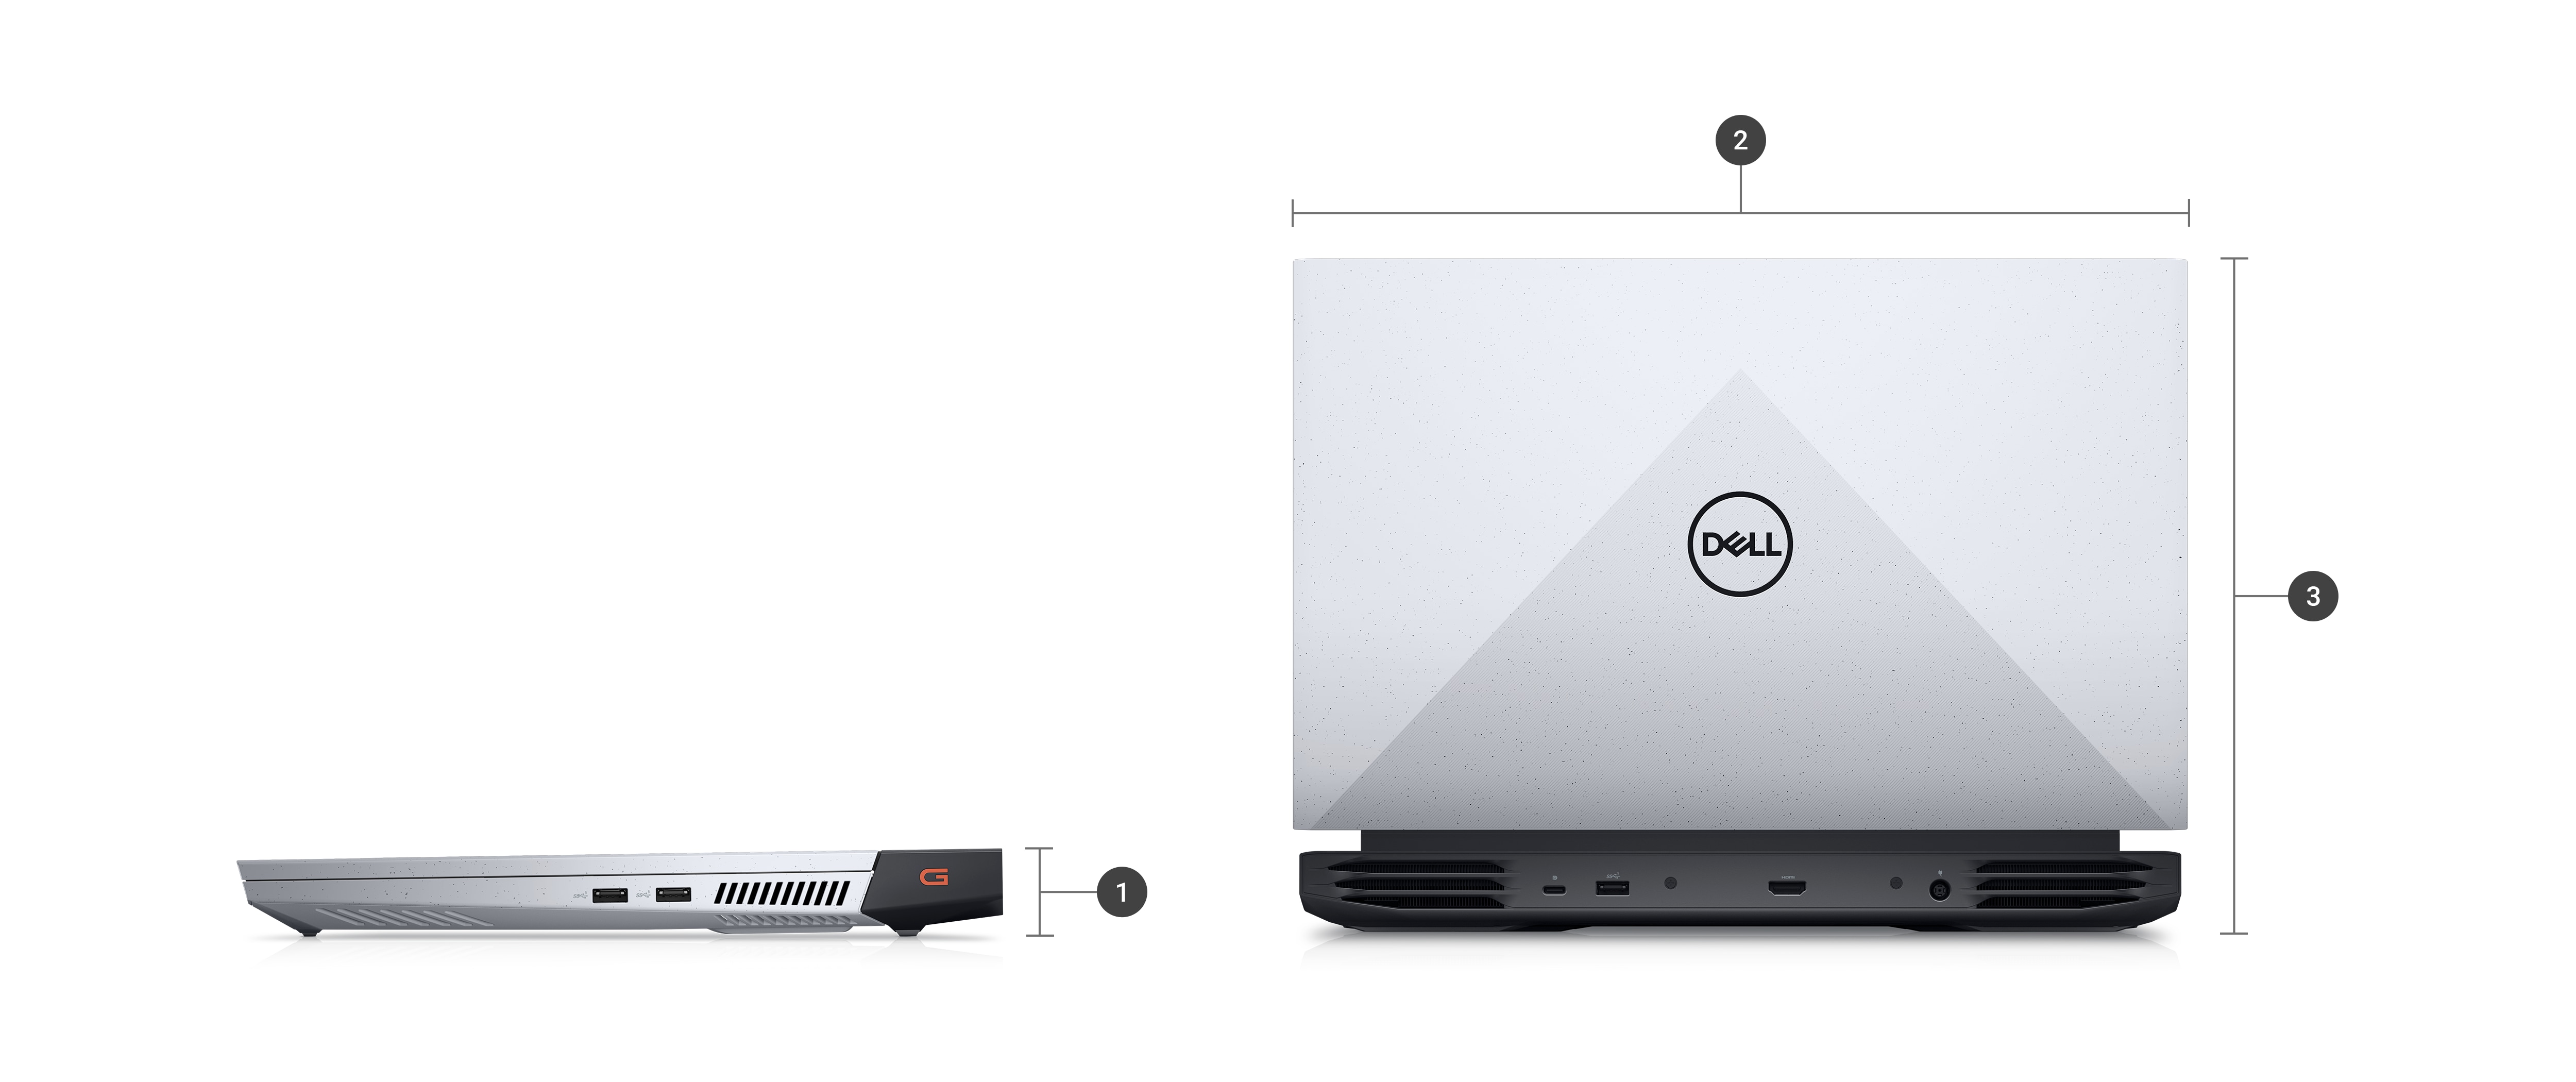 Picture of two Dell G15 5525 Gaming Laptops with numbers from 1 to 3 signaling product dimensions & weight.